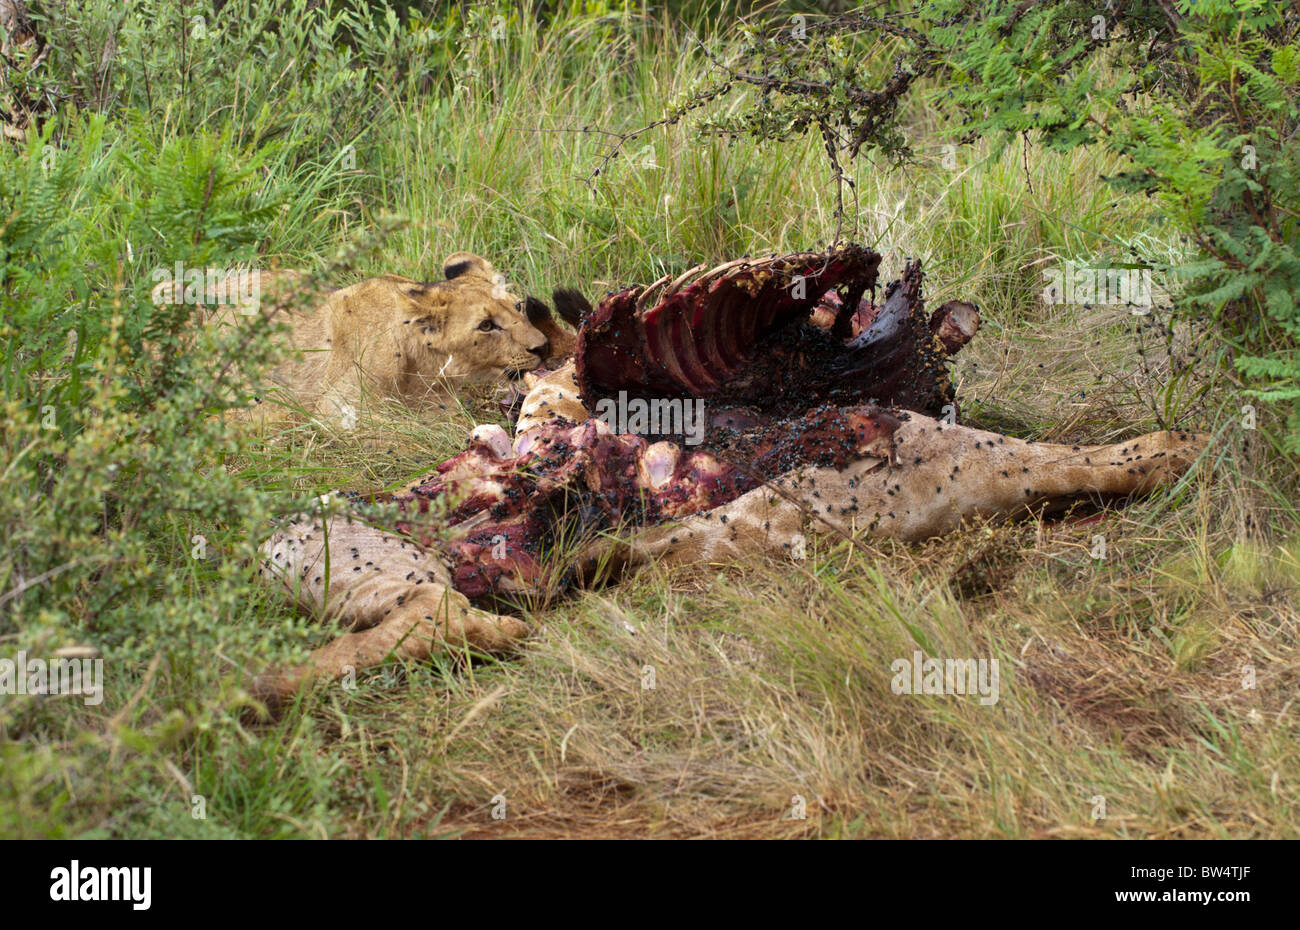 Young lion (Panthera leo) feeding on the decomposing carcass of a giraffe (Giraffa camelopardis) which is covered in flies Stock Photo